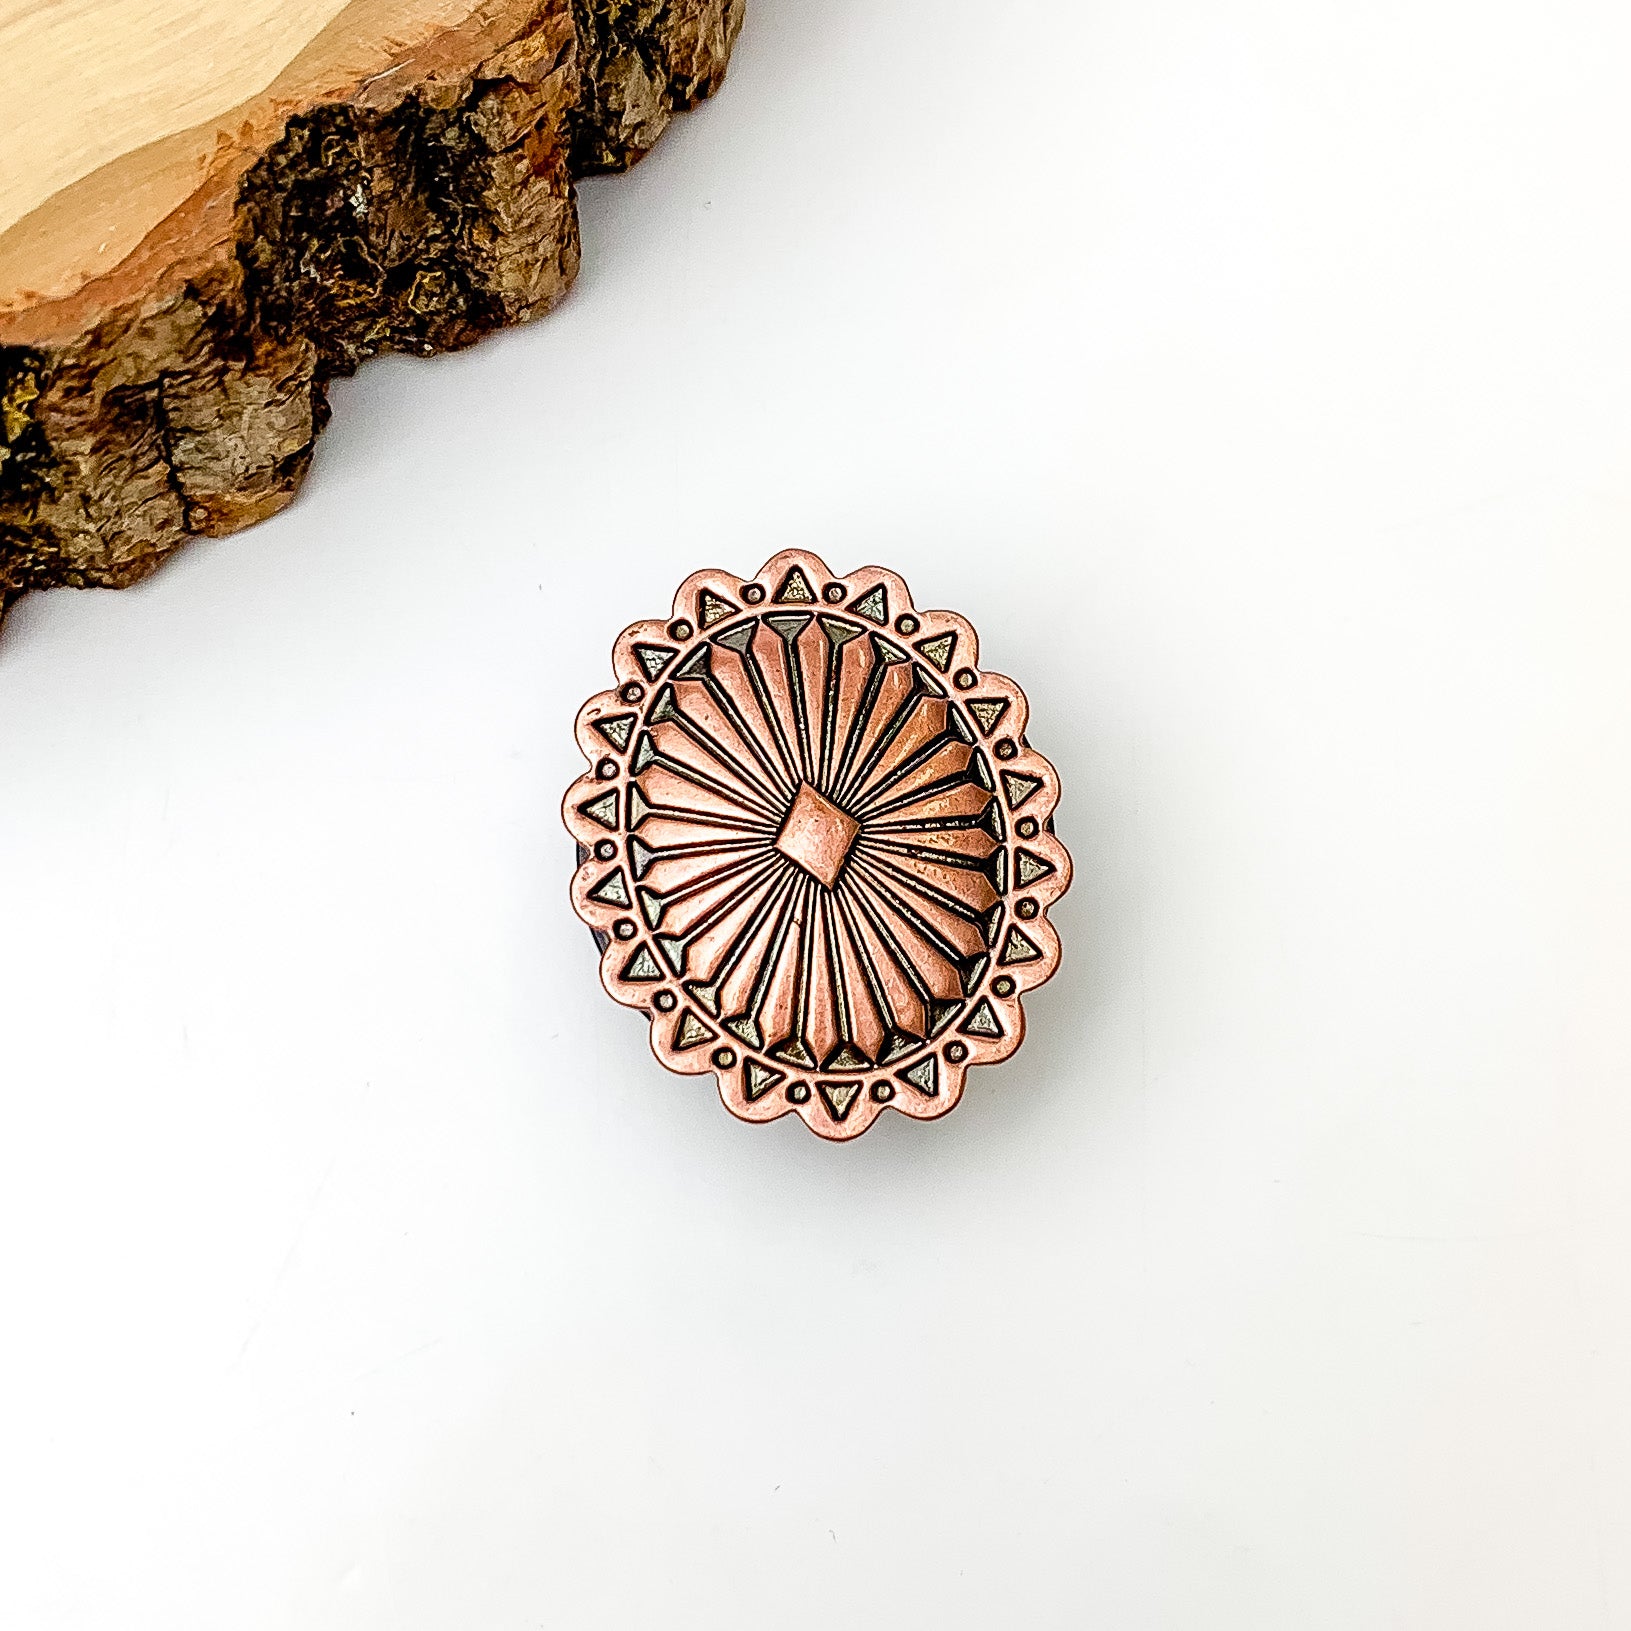 Copper tone oval phone grip. Pictured on a white background with a wood piece in the top left corner.